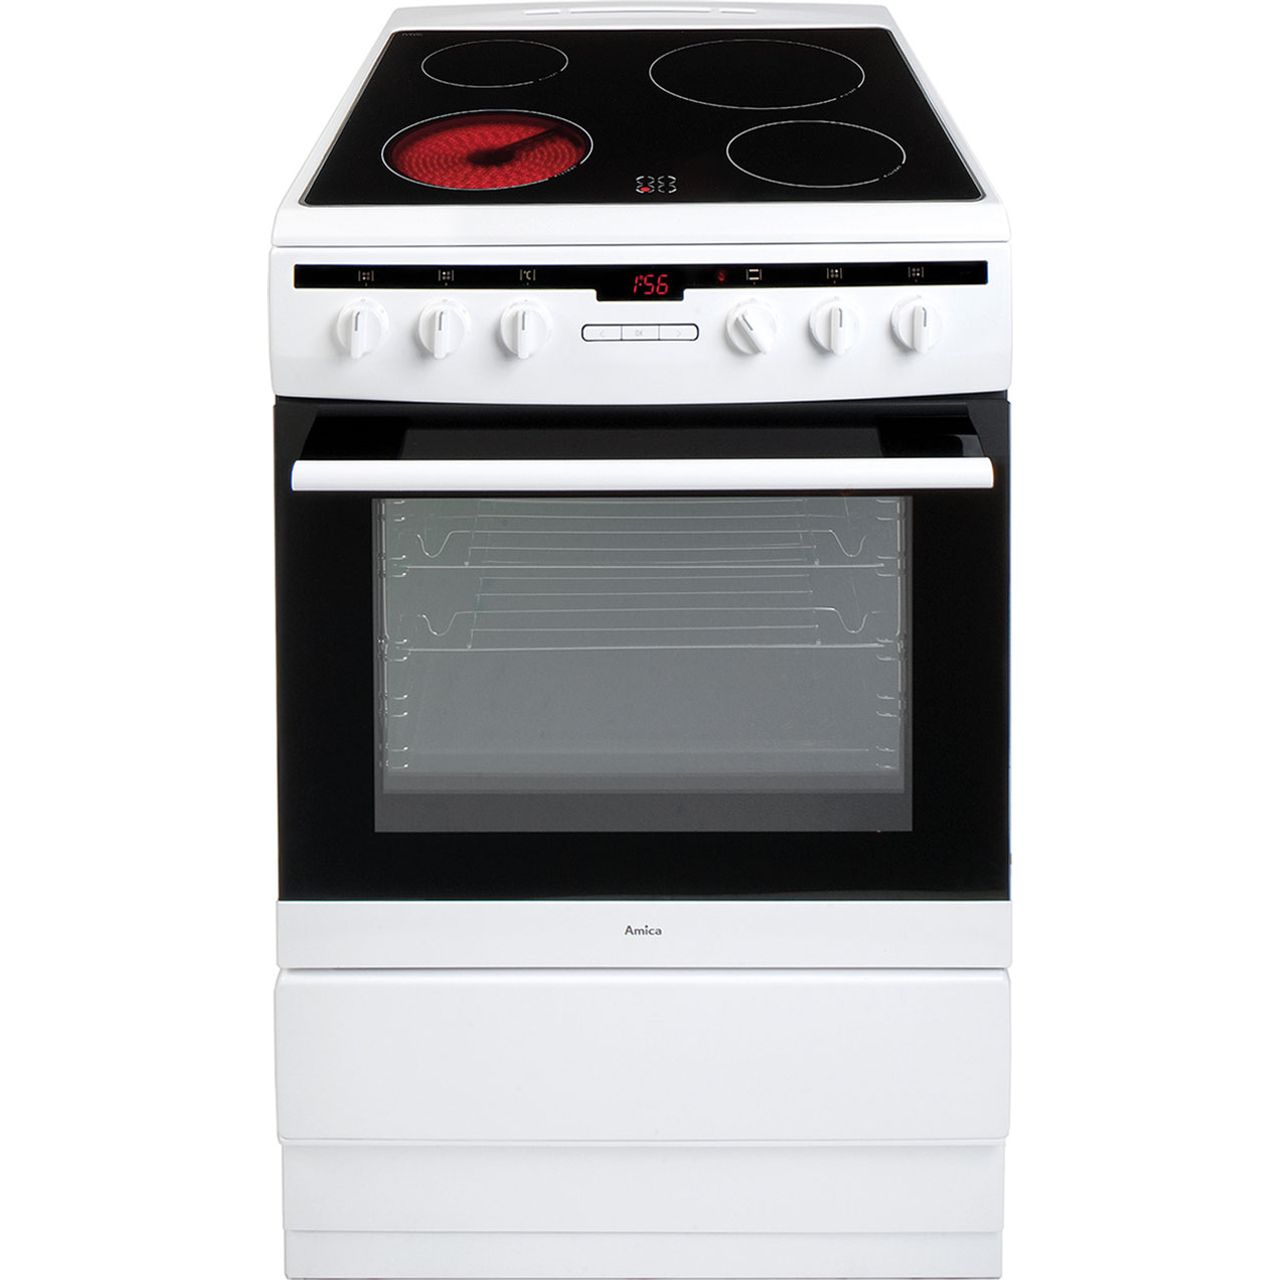 608ce2taw Wh Amica Electric Cooker White Ao Com